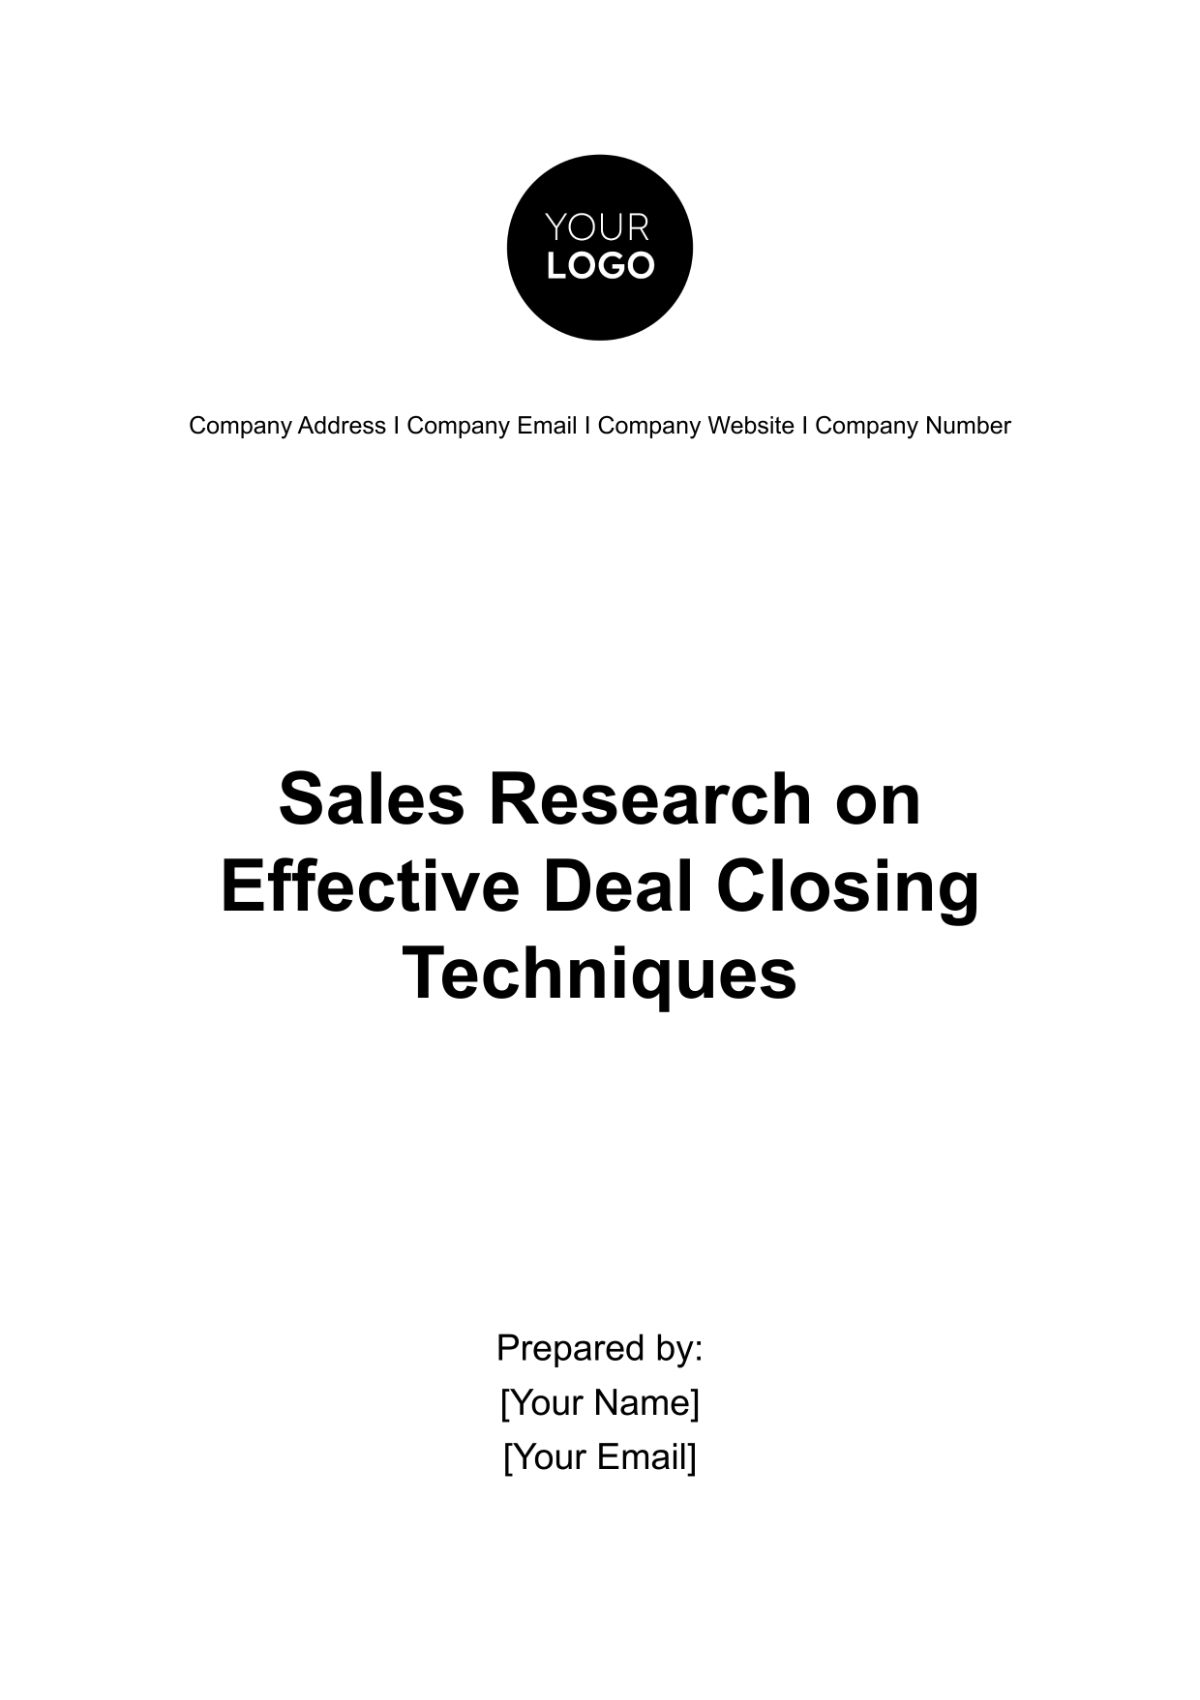 Sales Research on Effective Deal Closing Techniques Template